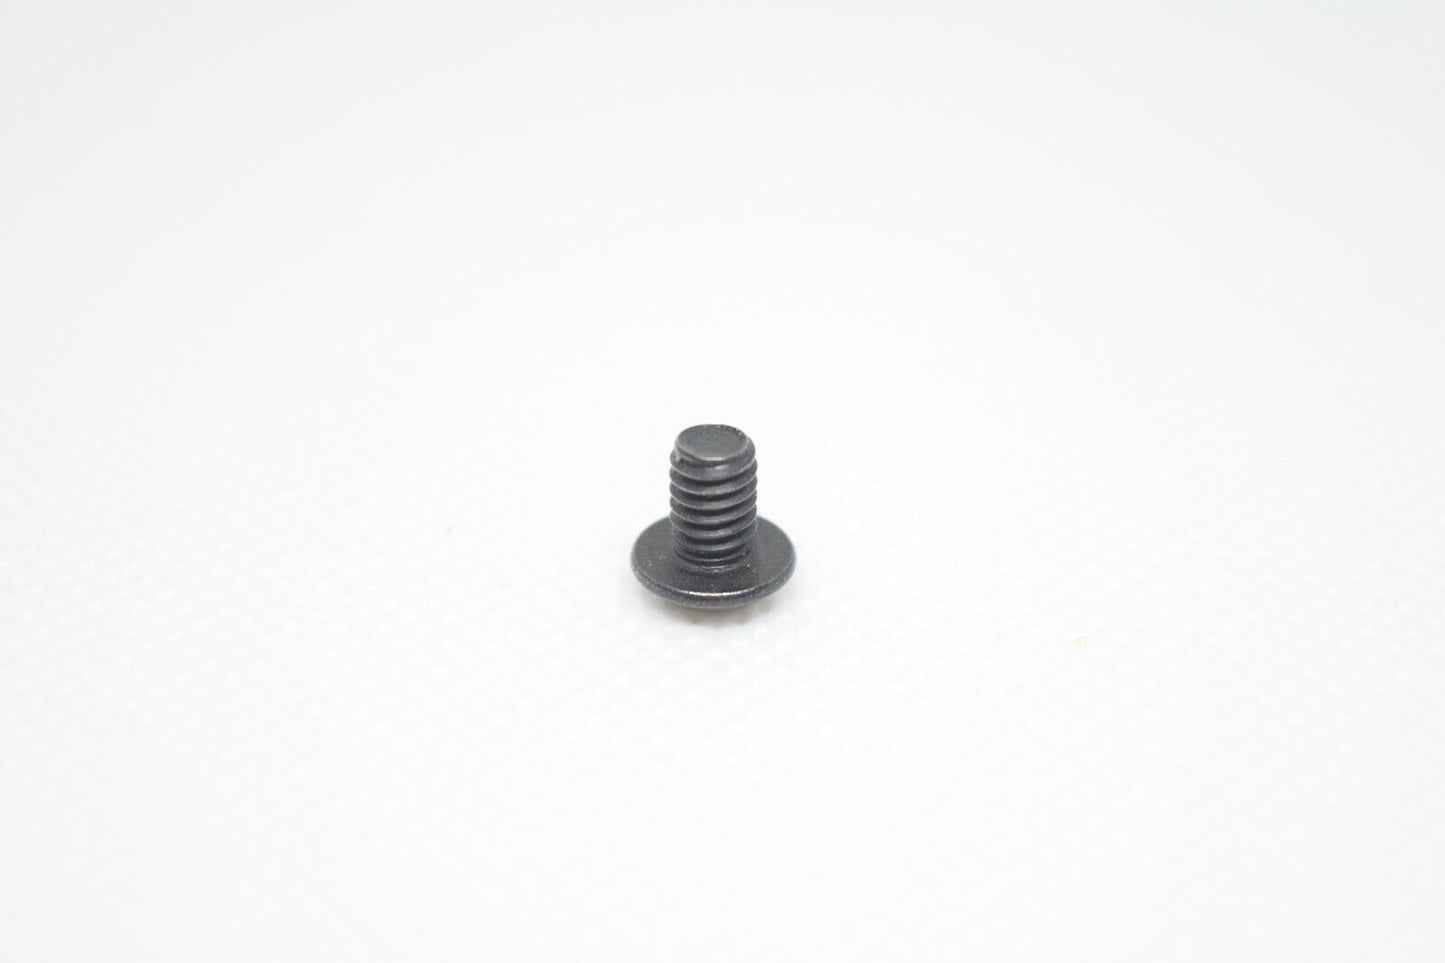 Crosman Hex Head Frame Screw Kit for 1322, 2240, 2250, 1377, and others